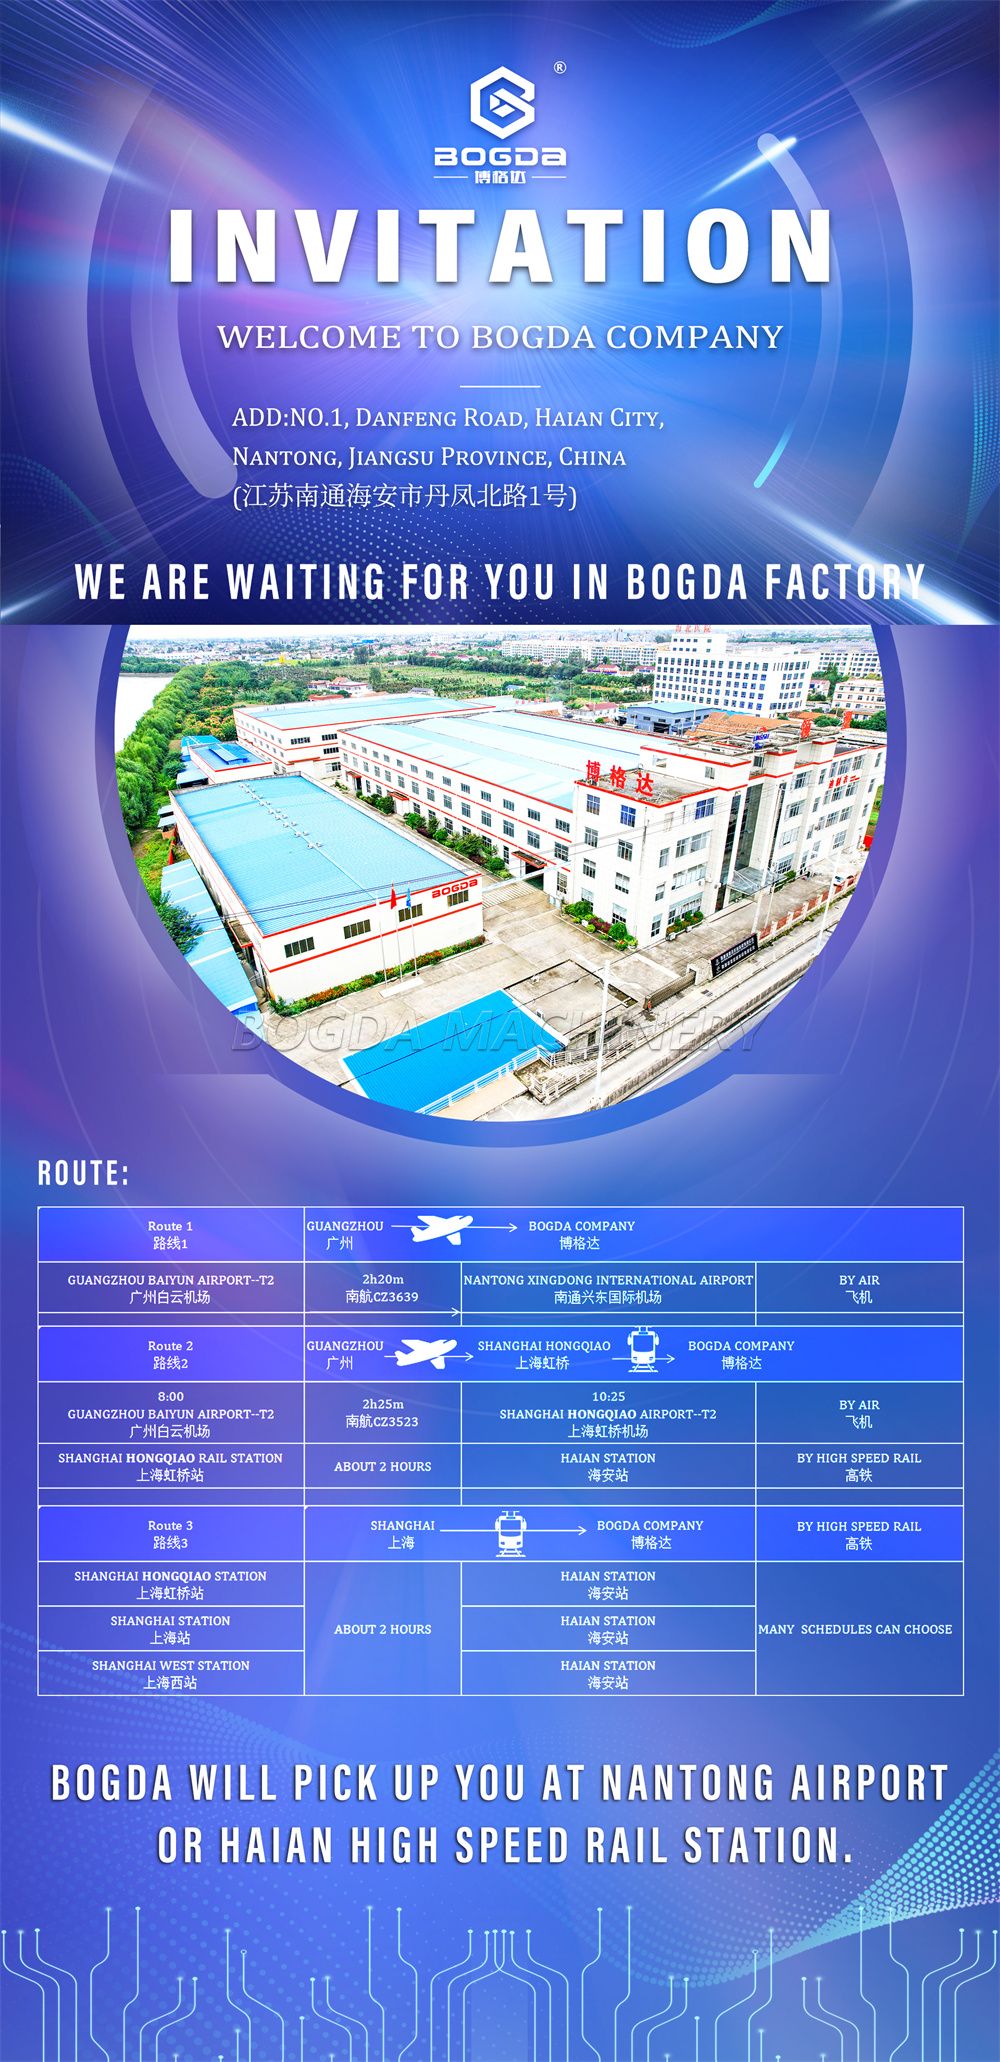 INVITATION ! Welcome to visit our Bogda Machinery Company！